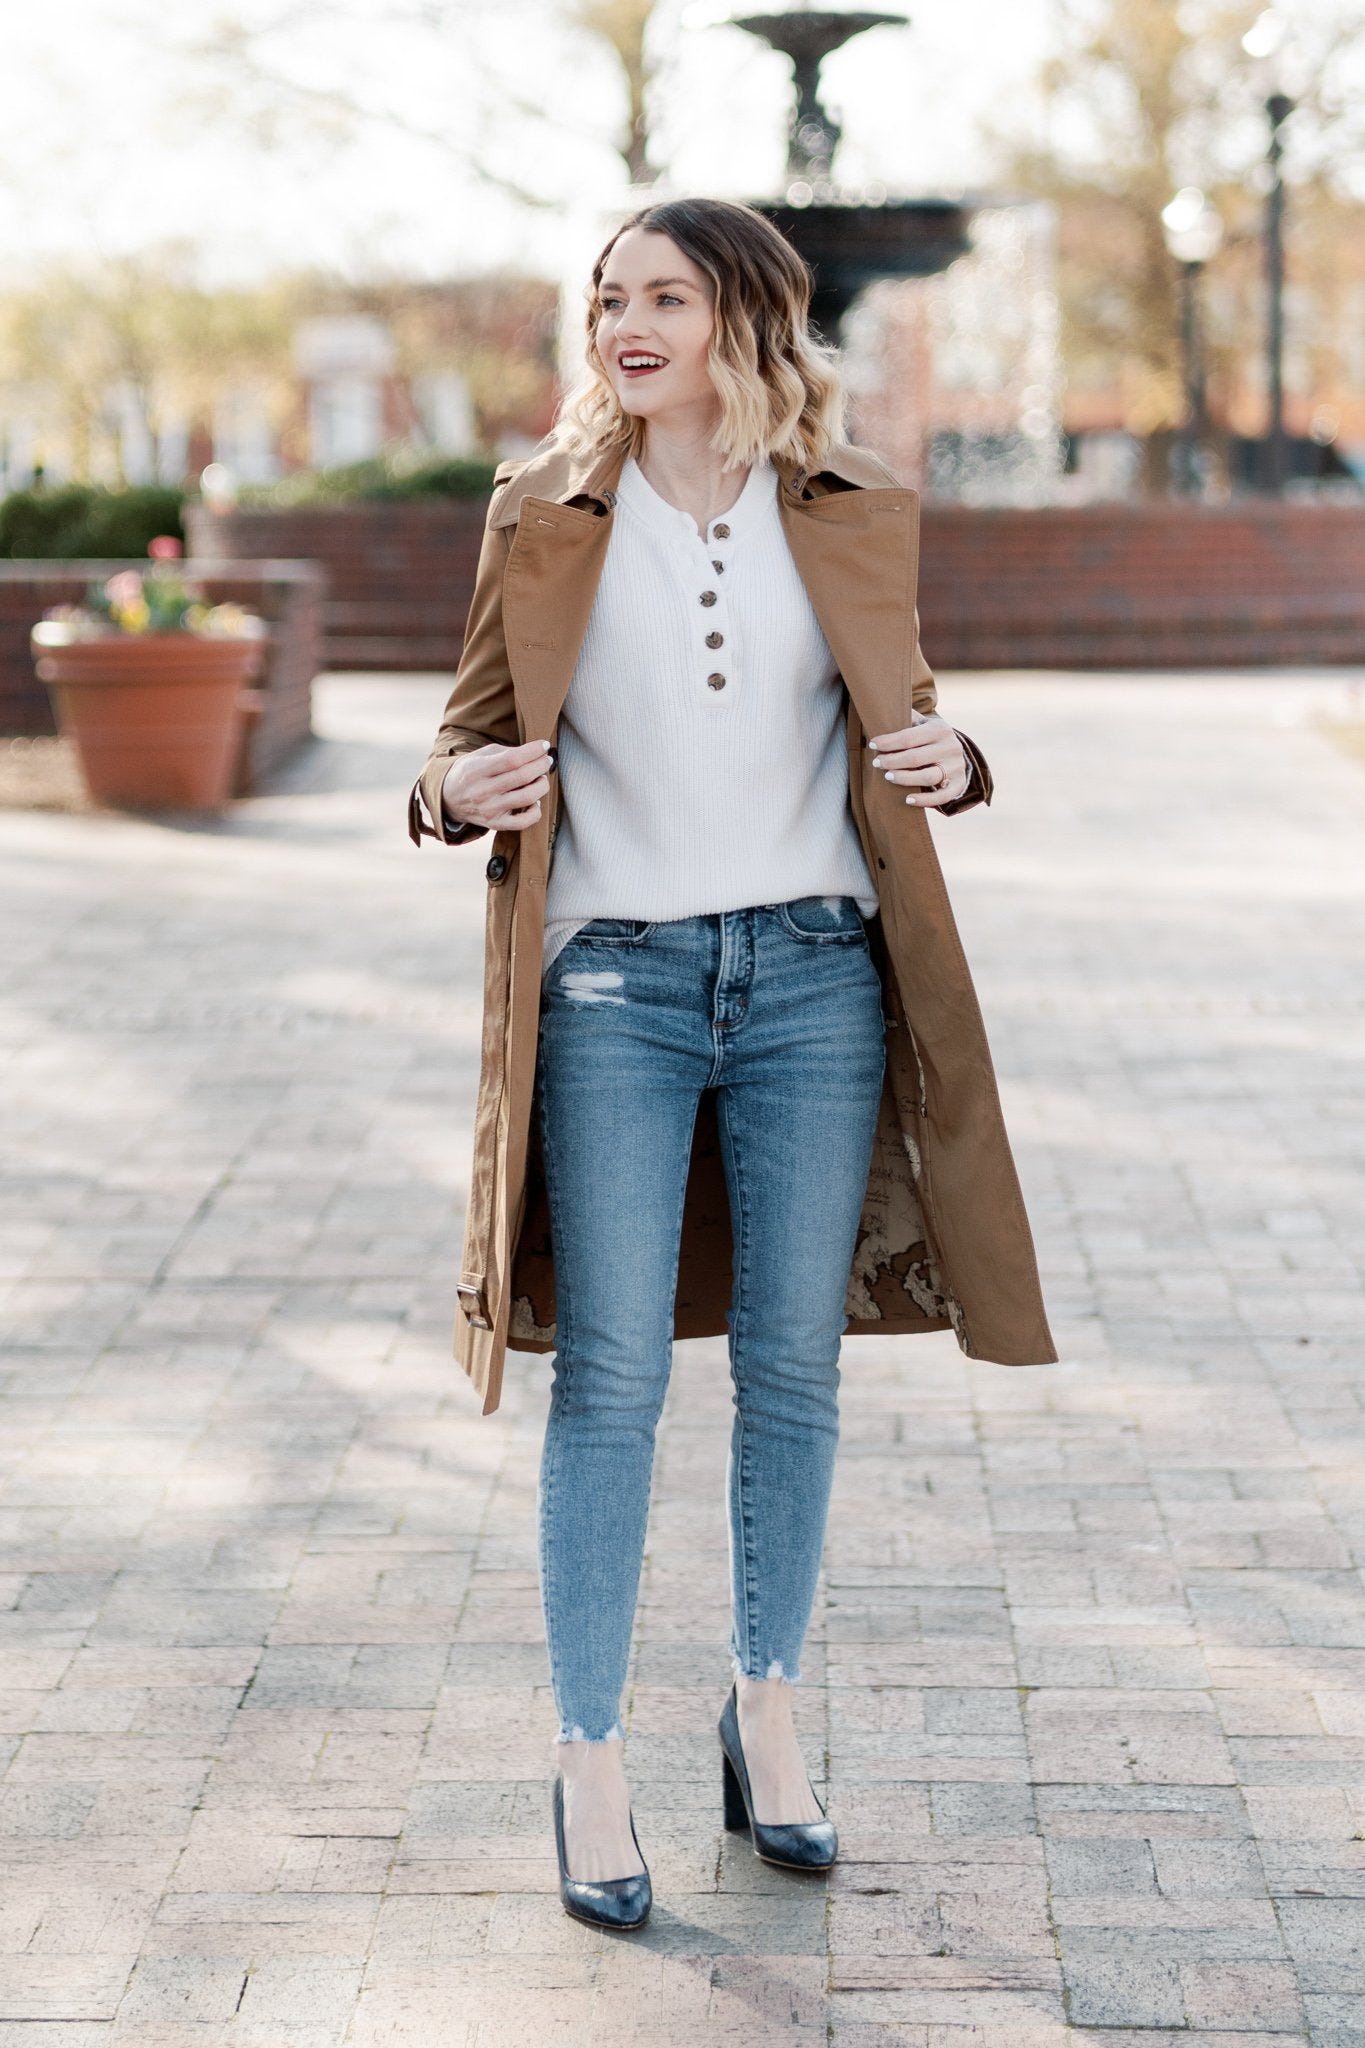 How Should a Petite Blazer Fit? Finding the Perfect Petite Blazer